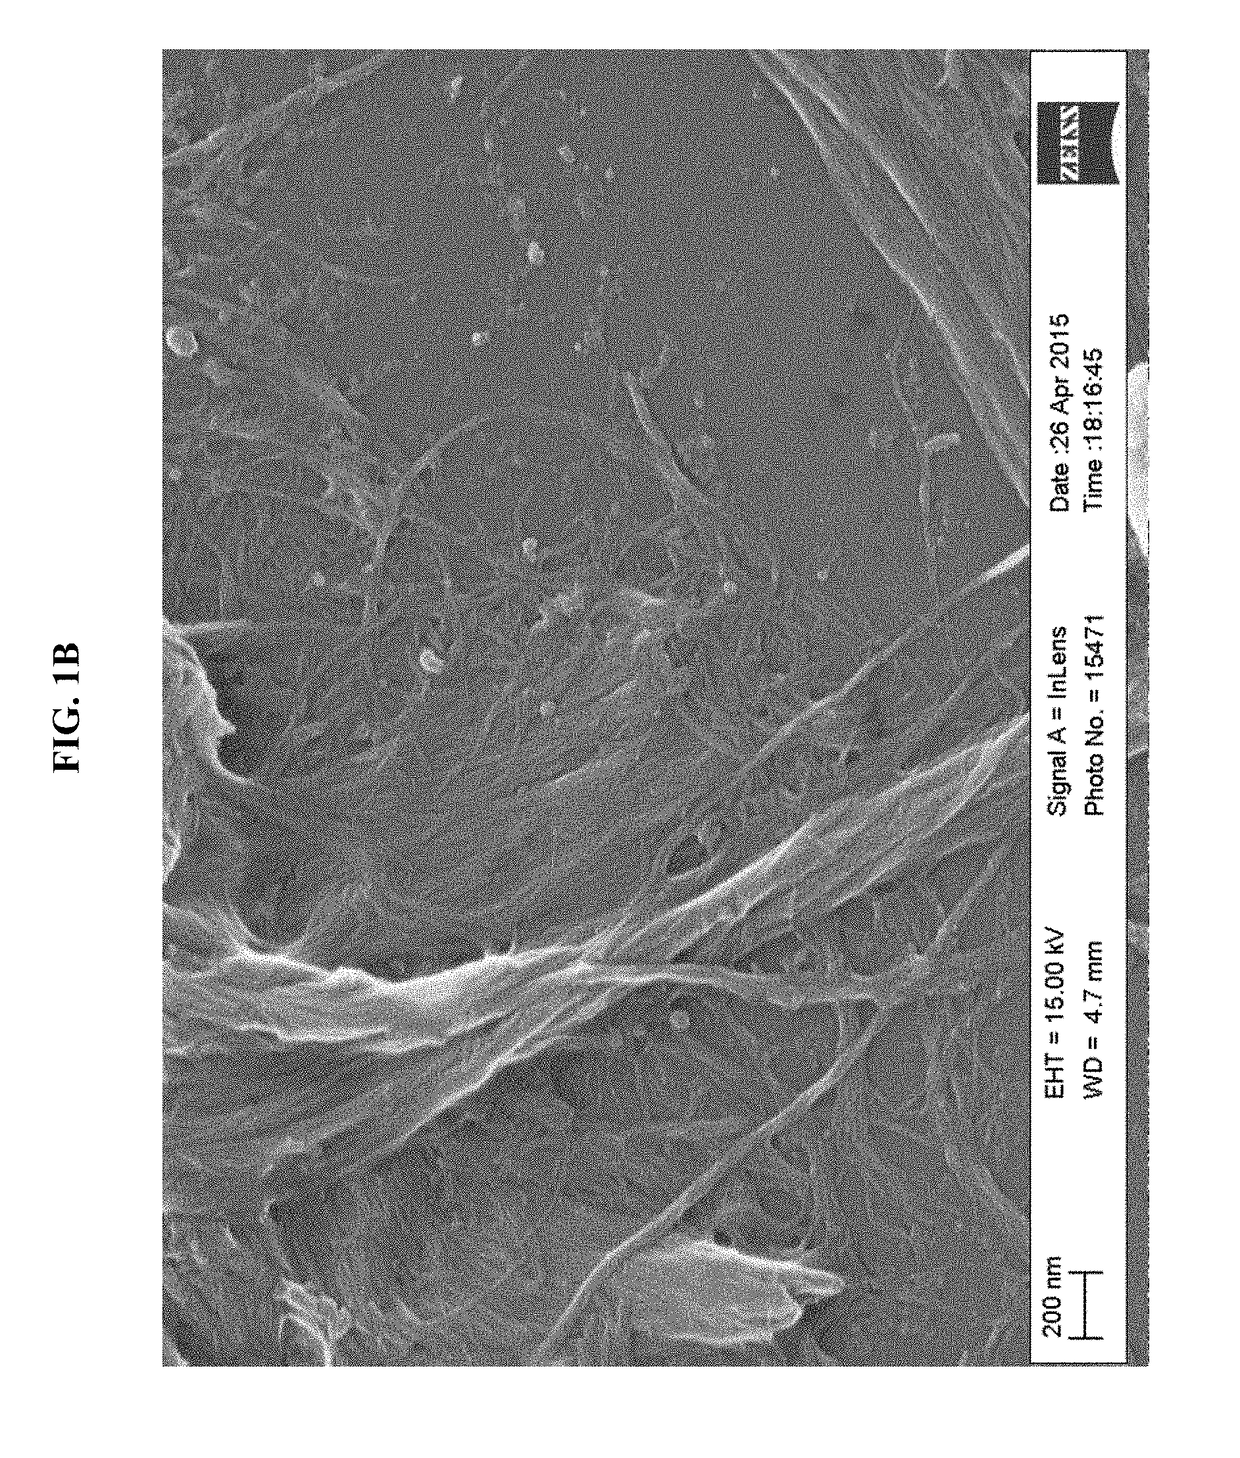 Nanolignocellulose compositions and processes to produce these compositions